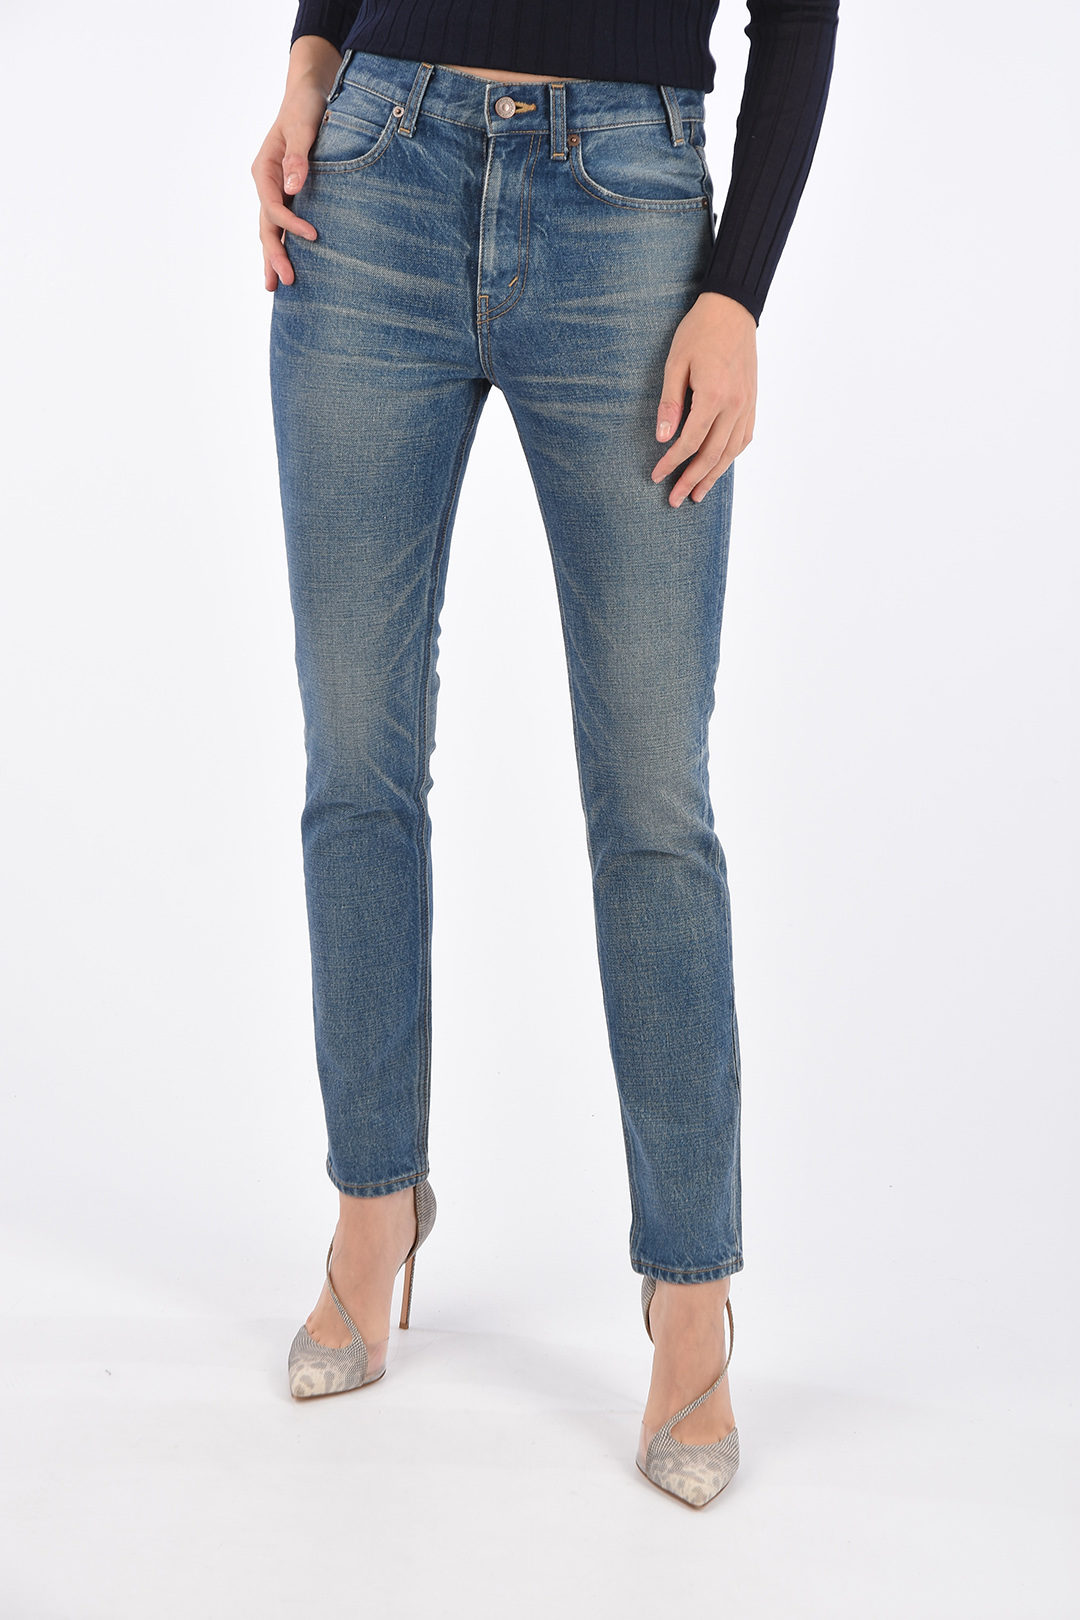 Celine Stonewashed Tapered Jeans women - Glamood Outlet